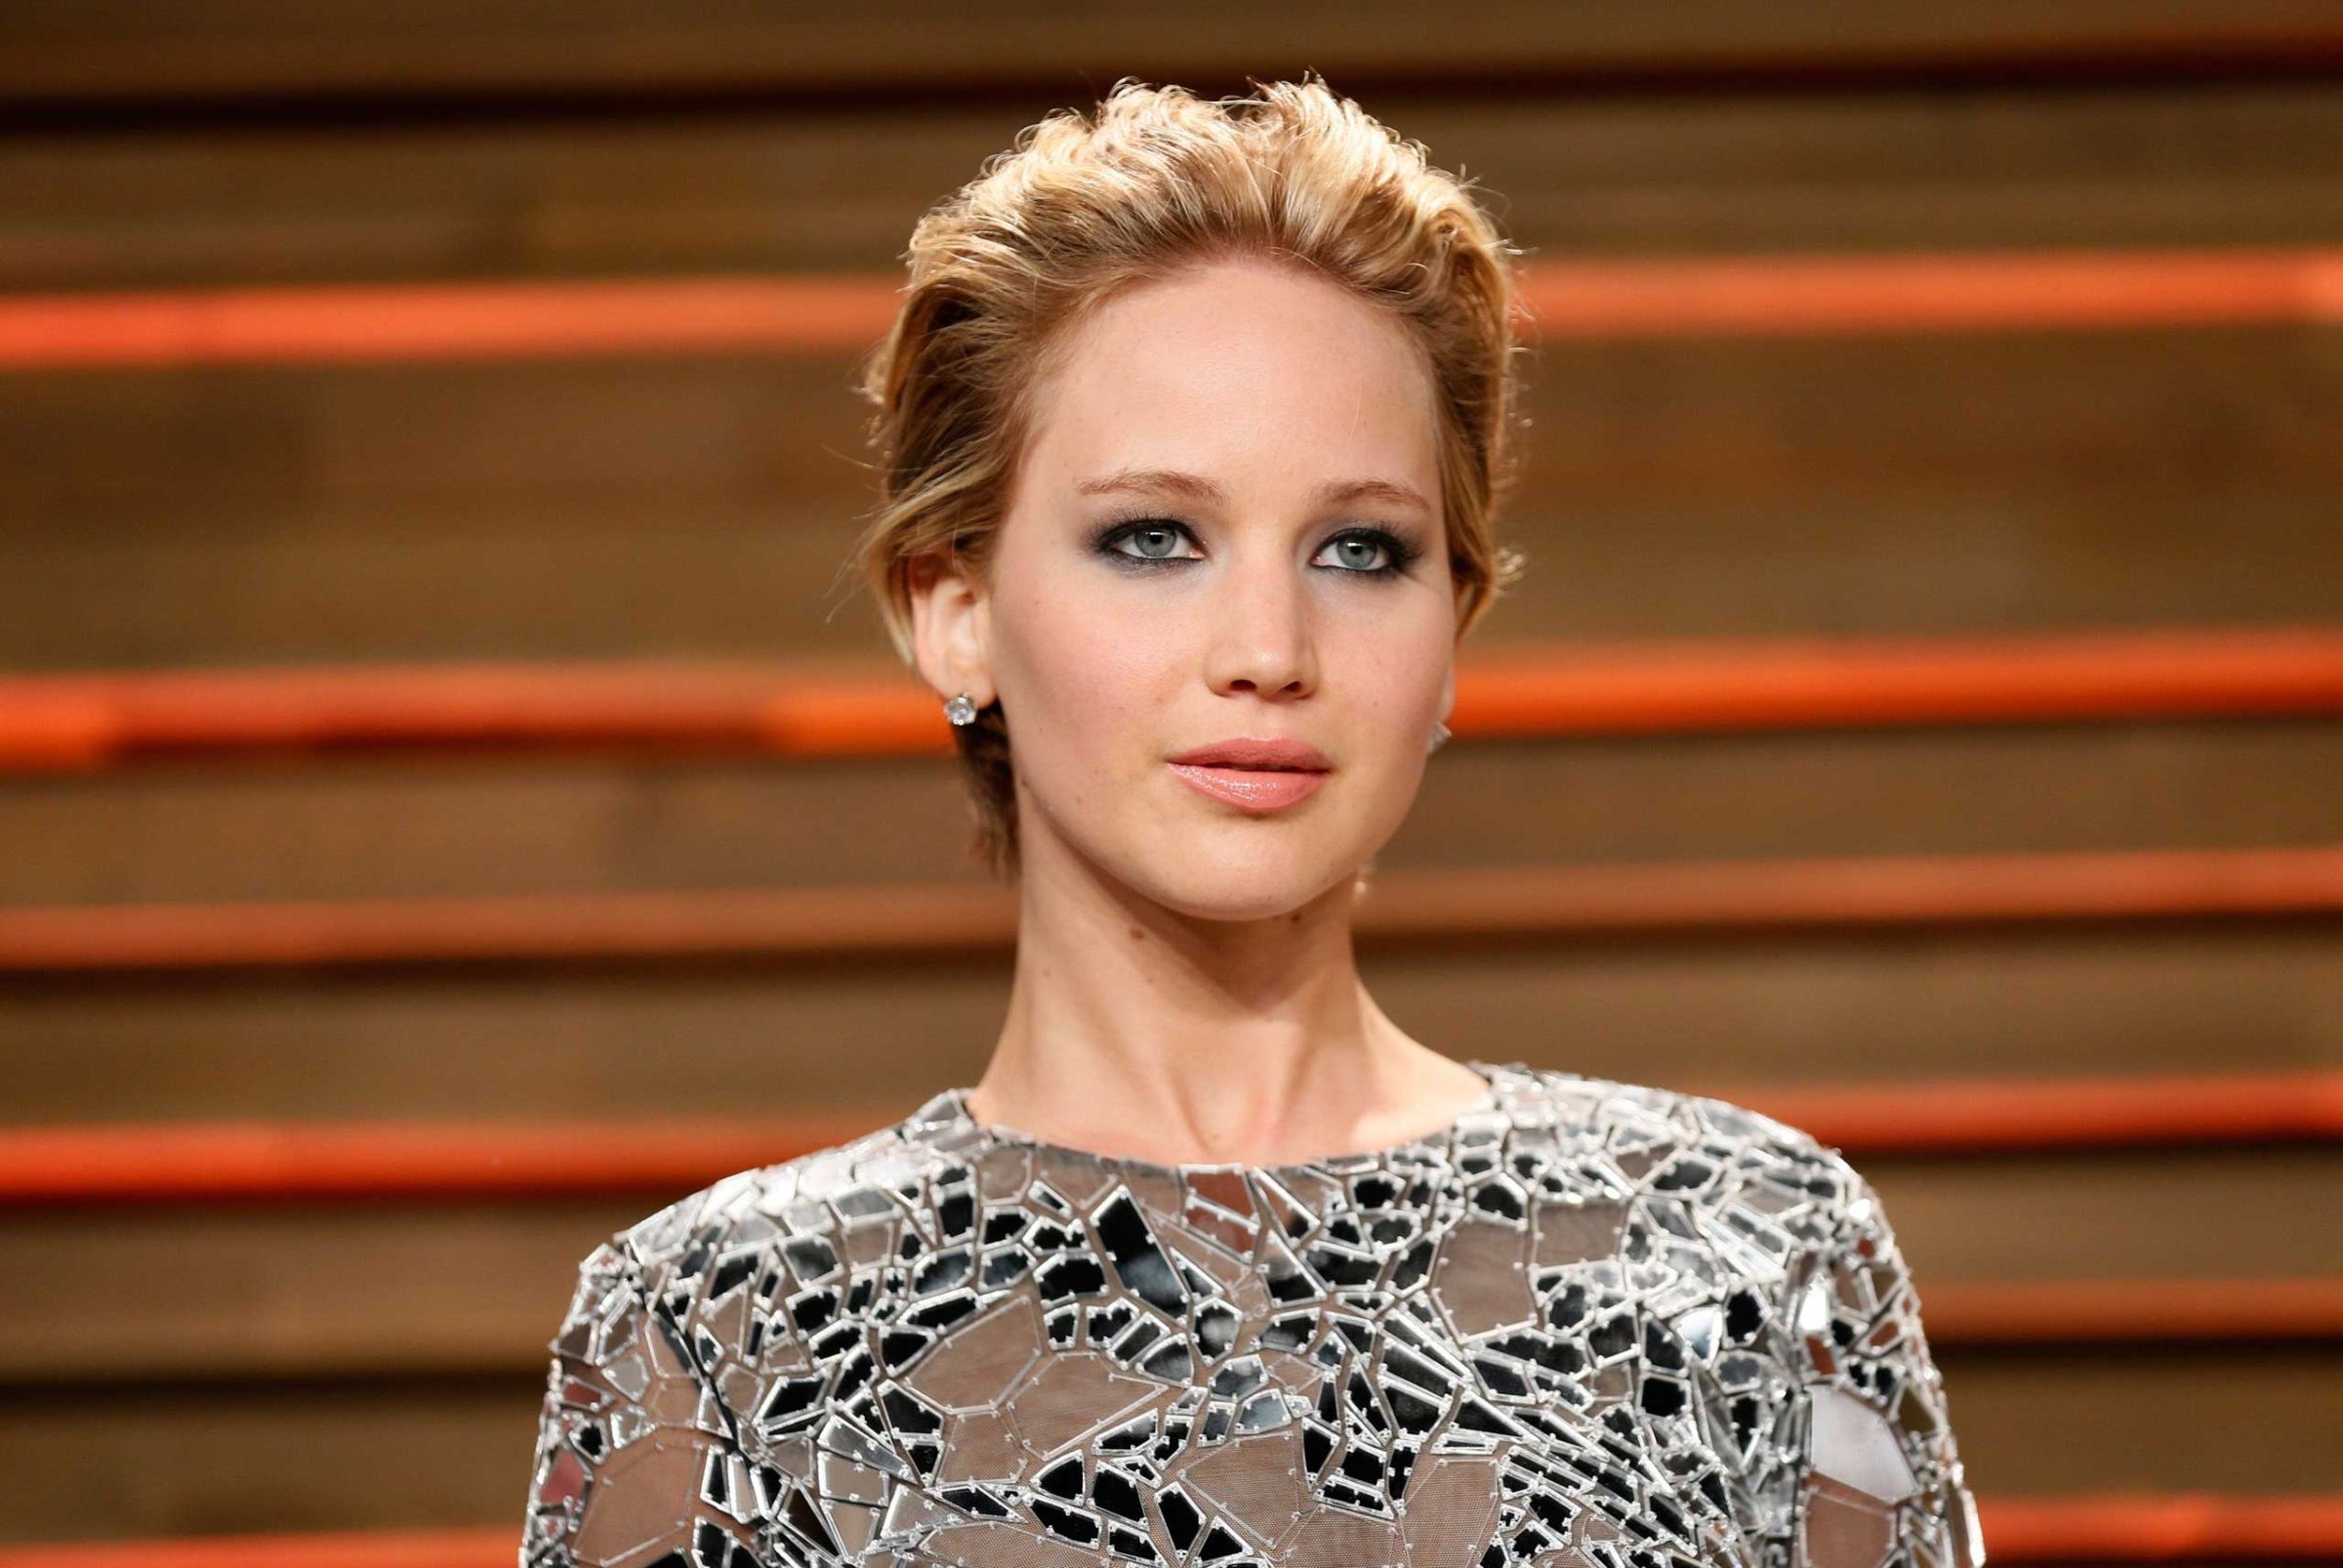 File photo of actress Jennifer Lawrence arriving at the 2014 Vanity Fair Oscars Party in West Hollywood